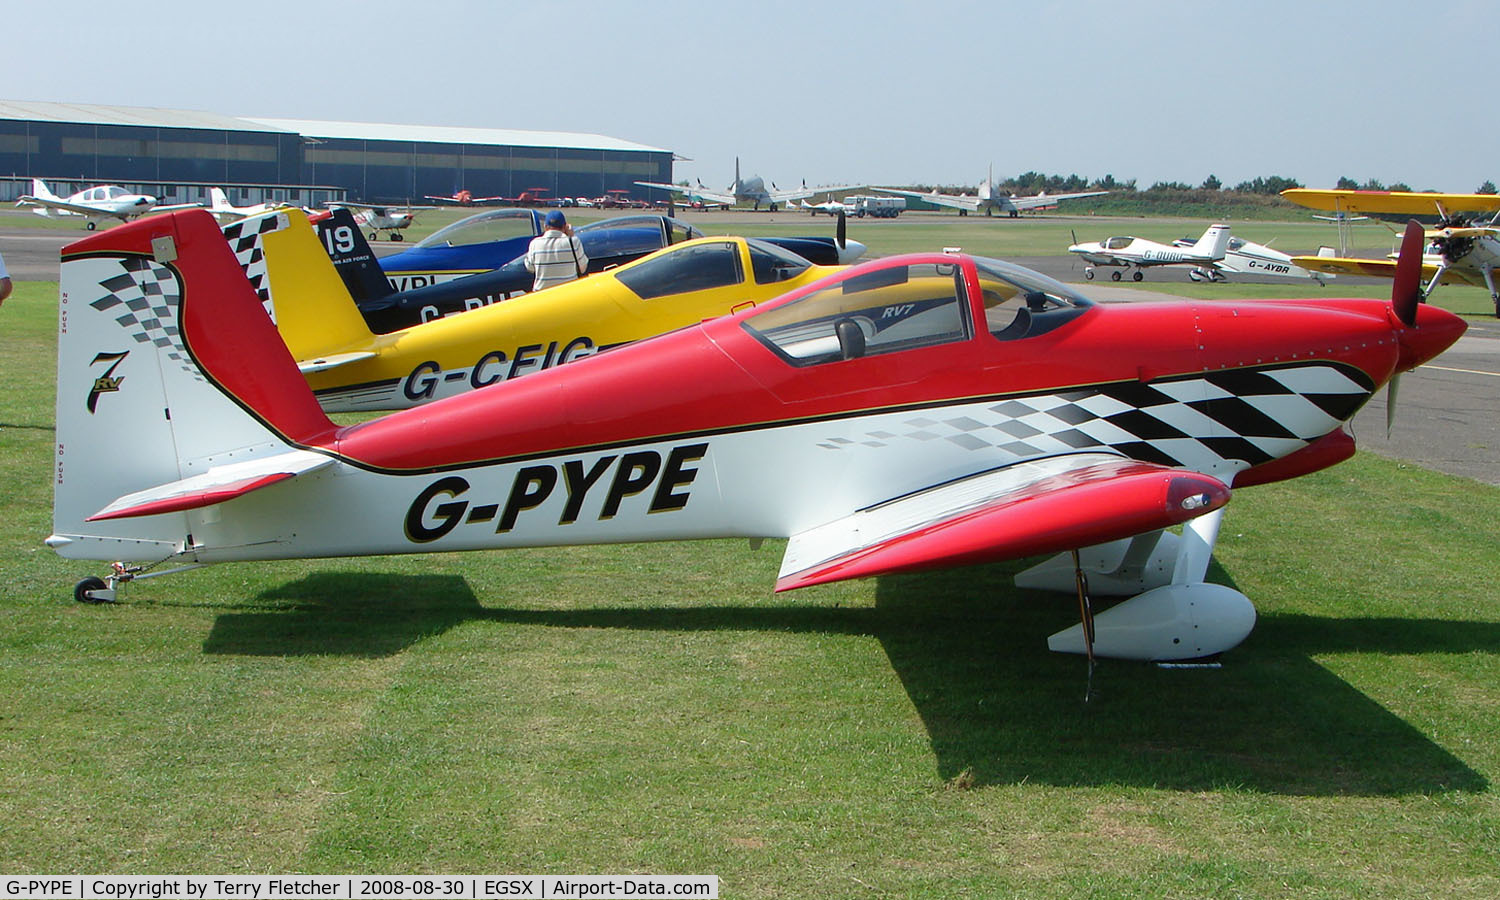 G-PYPE, 2007 Vans RV-7 C/N PFA 323-14398, Participant in the 2008 RV Fly-in at North Weald Uk